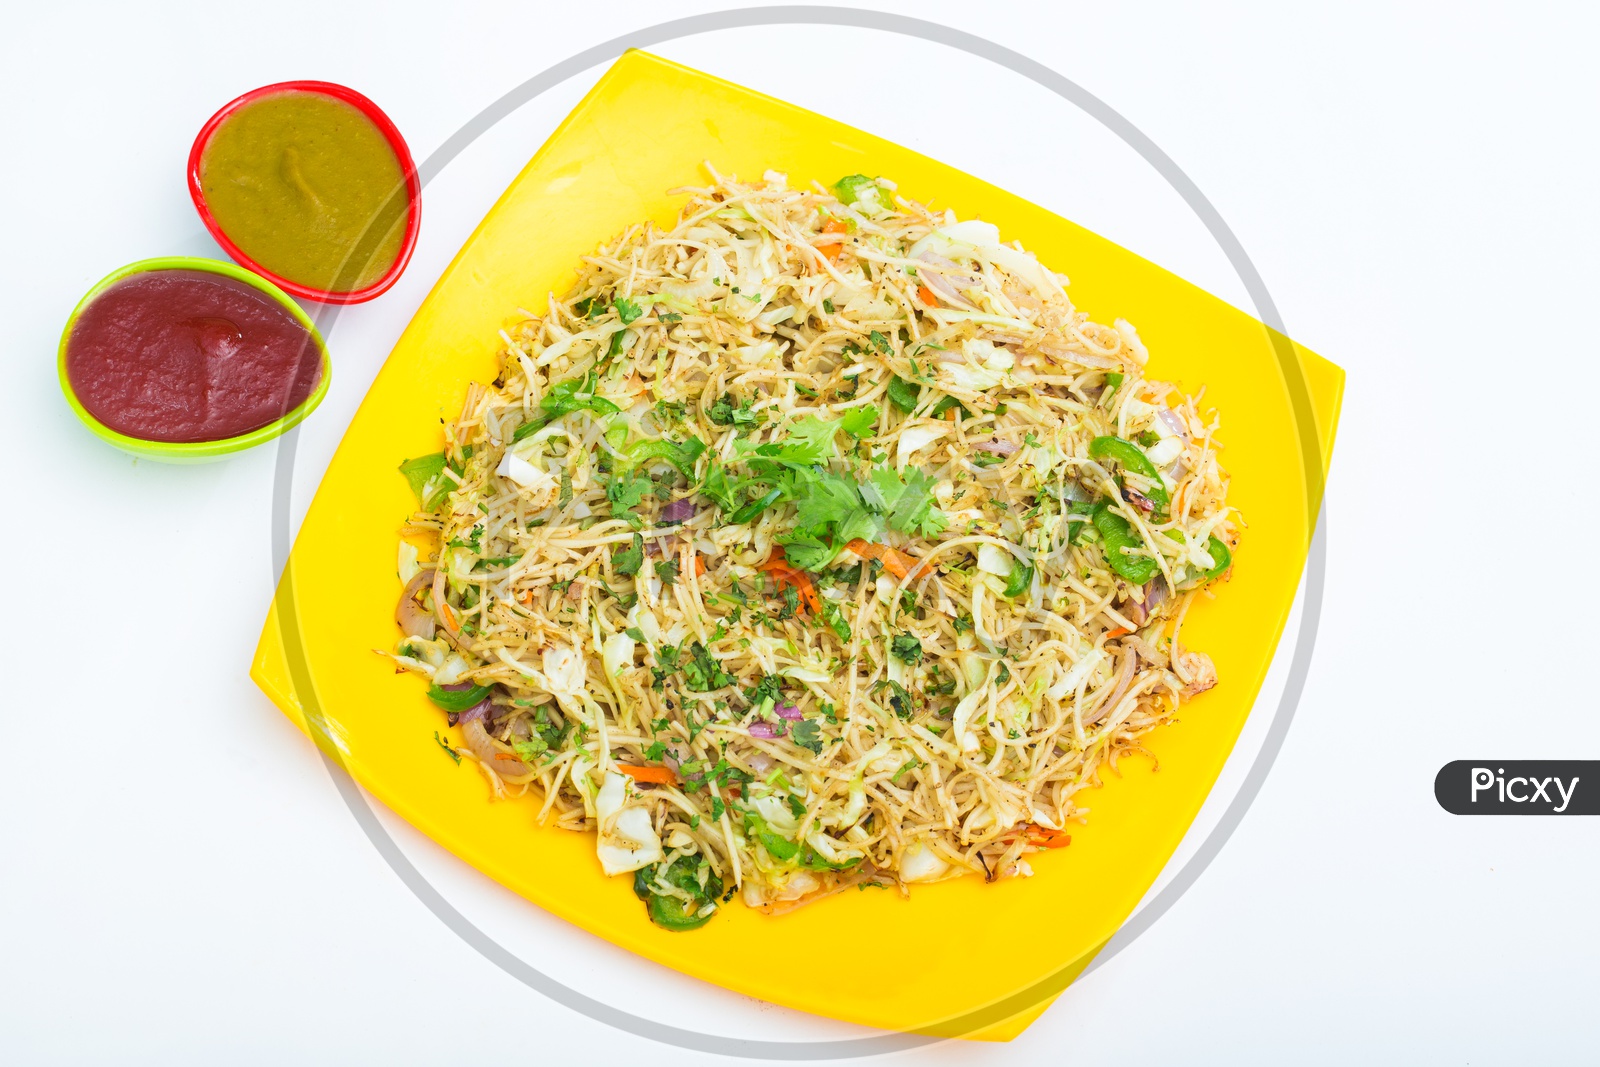 Indo - Chineese  Recipe  Noodles Presenting in a Plate  Composition Shot With White Background